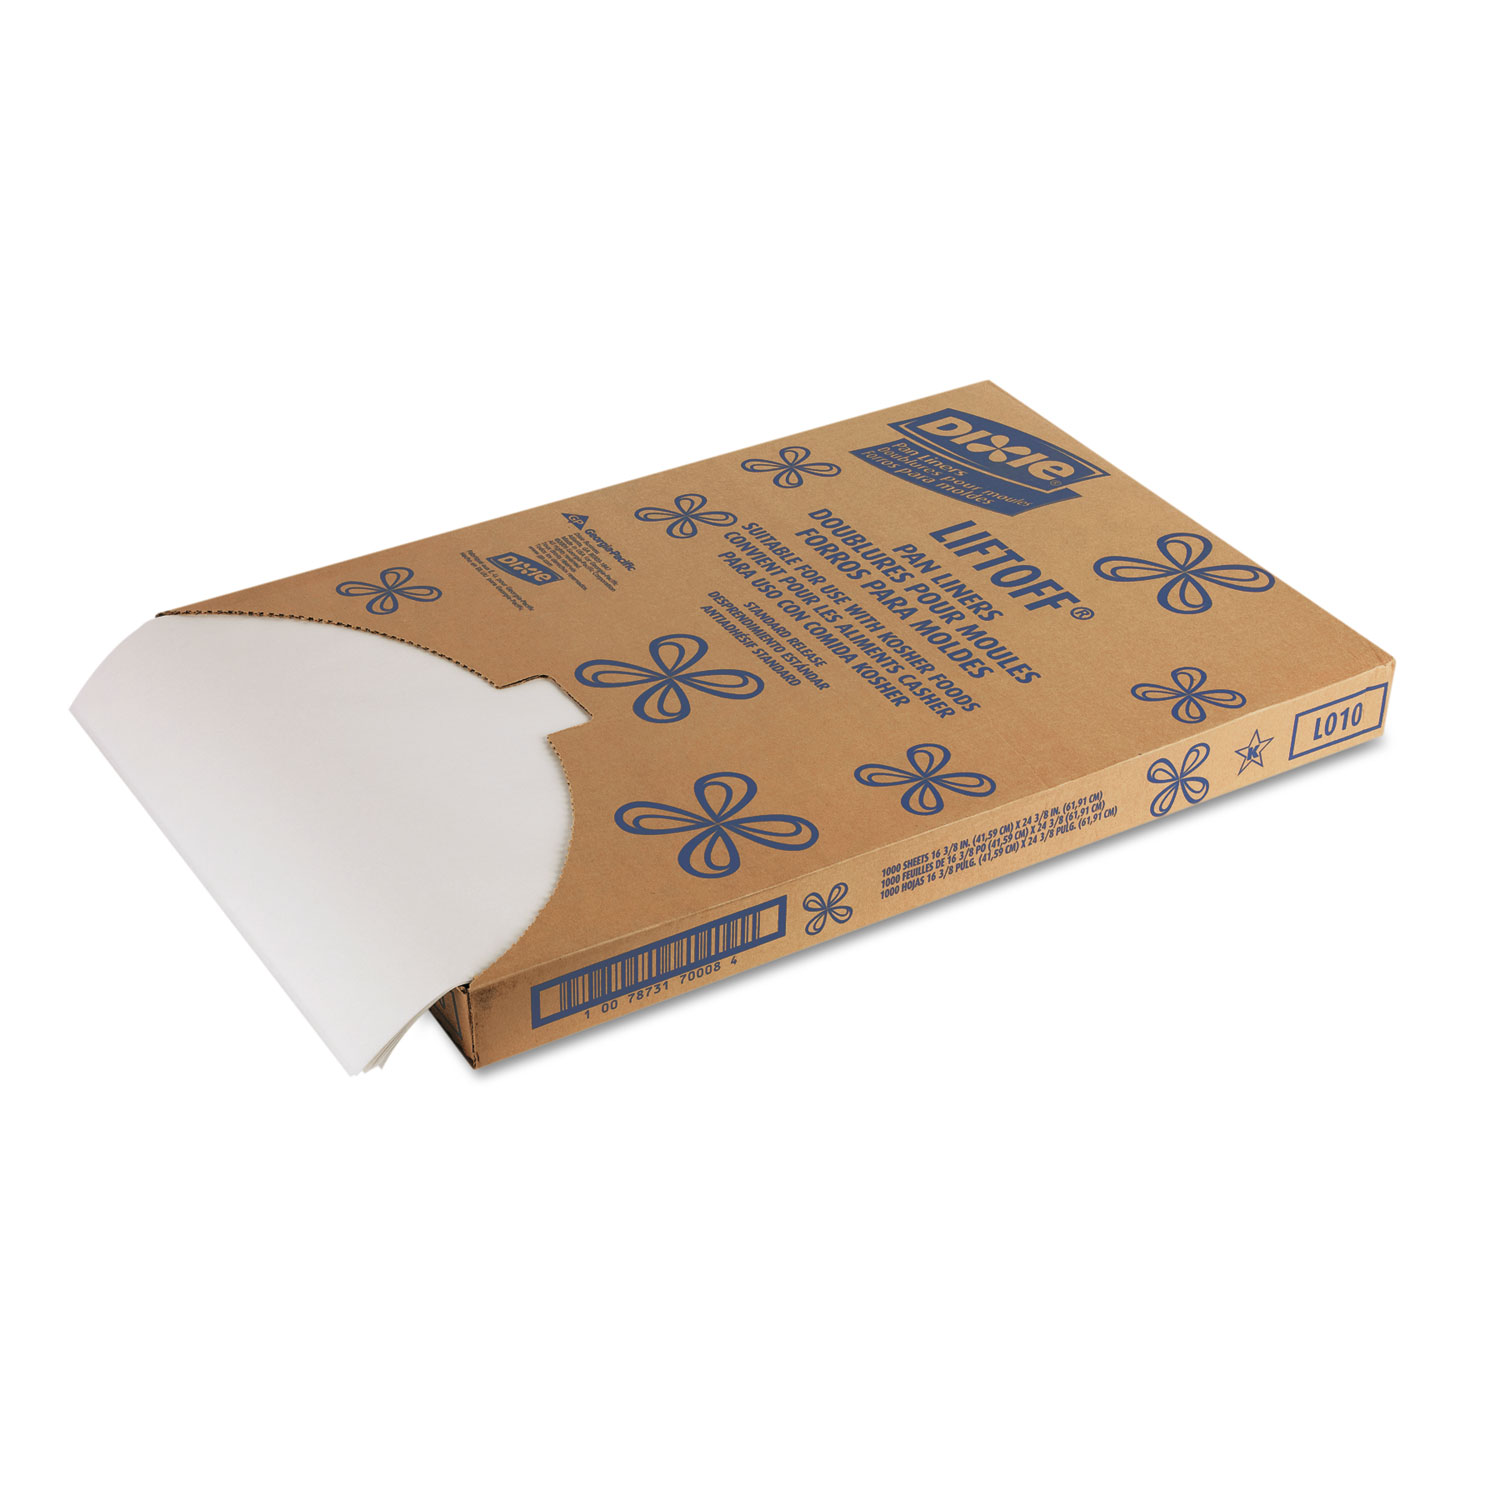  Dixie LO10 Greaseproof Liftoff Pan Liners, 16 3/8 x 24 3/8, White, 1000 Sheets/Carton (DXELO10) 